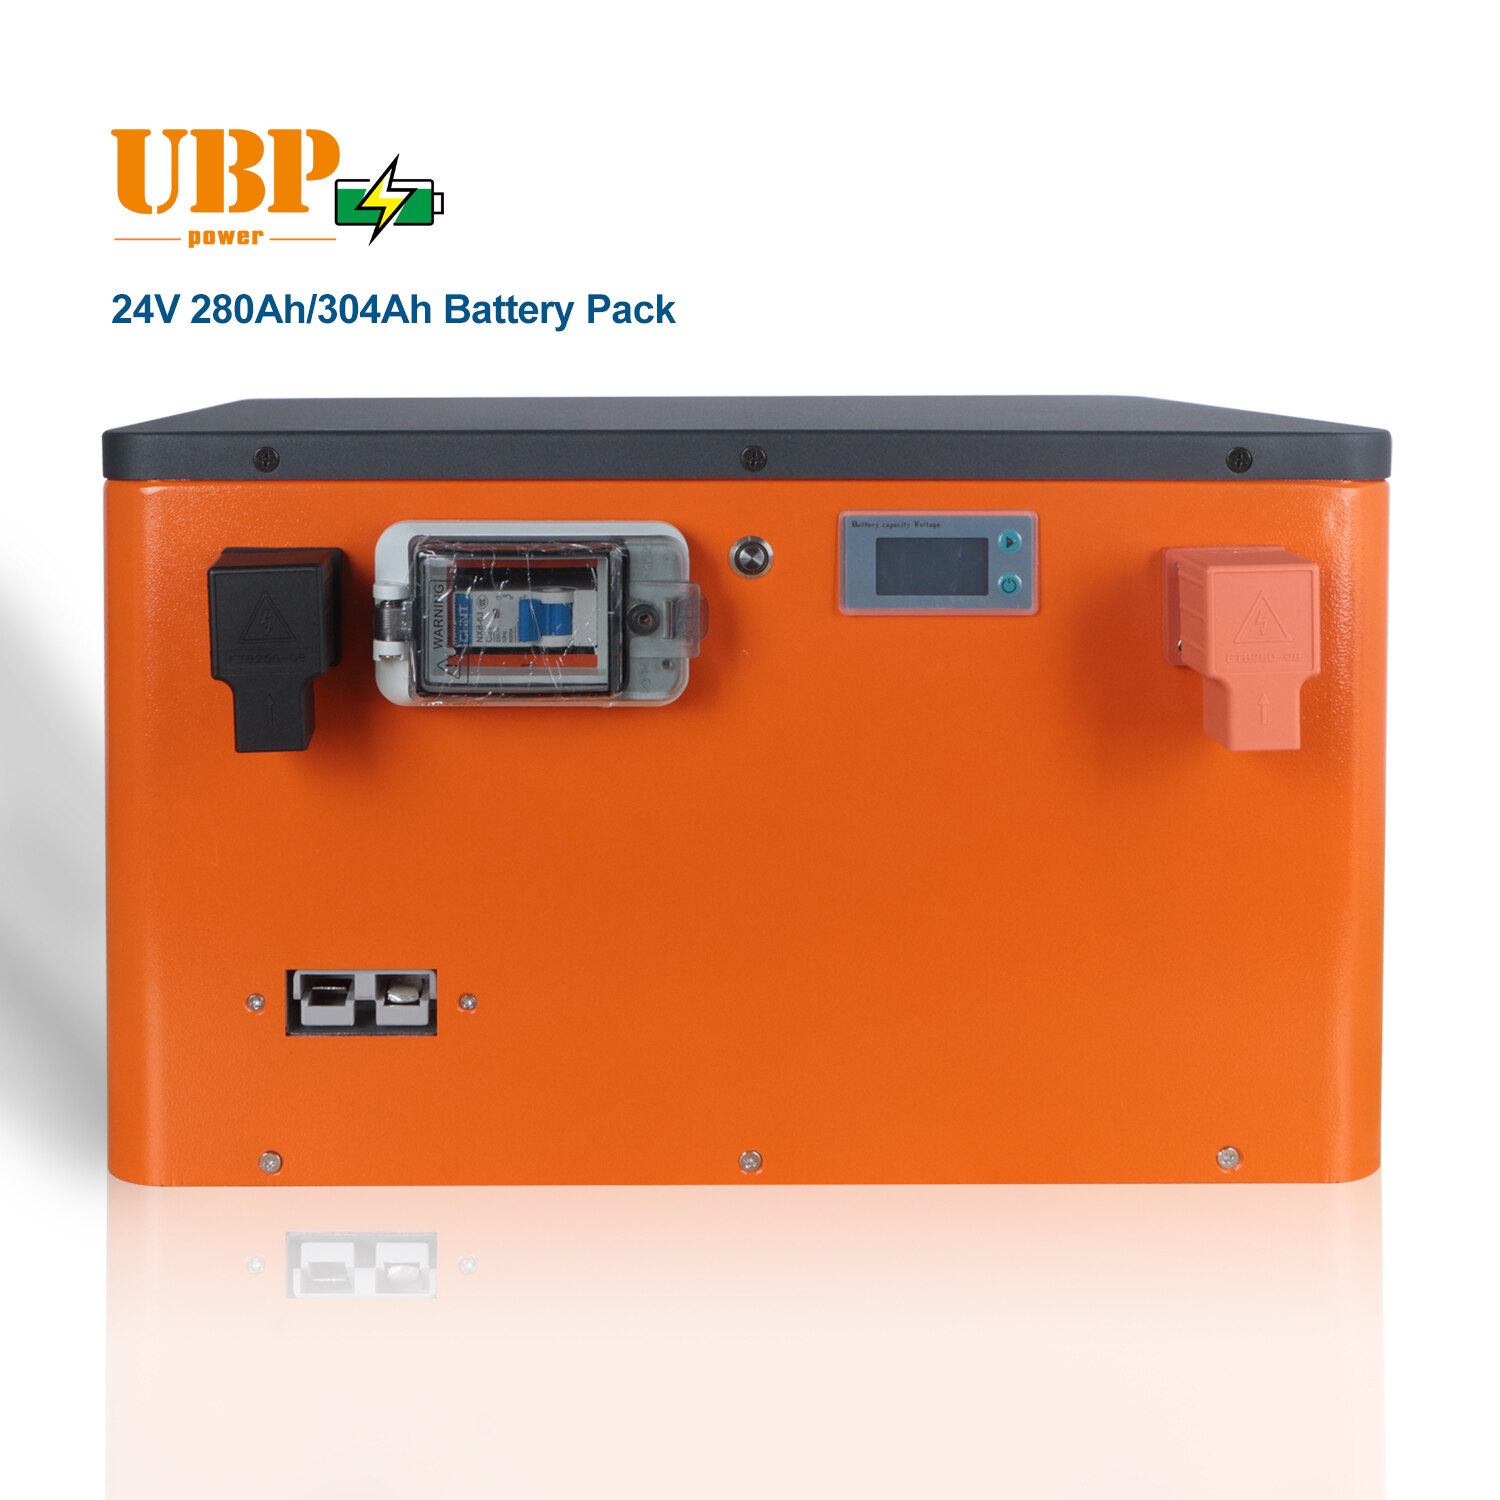 UBPPOWER 24V 280Ah/304Ah LiFePo4 Battery Pack 7.168Kwh ~ 10Kwh Energy